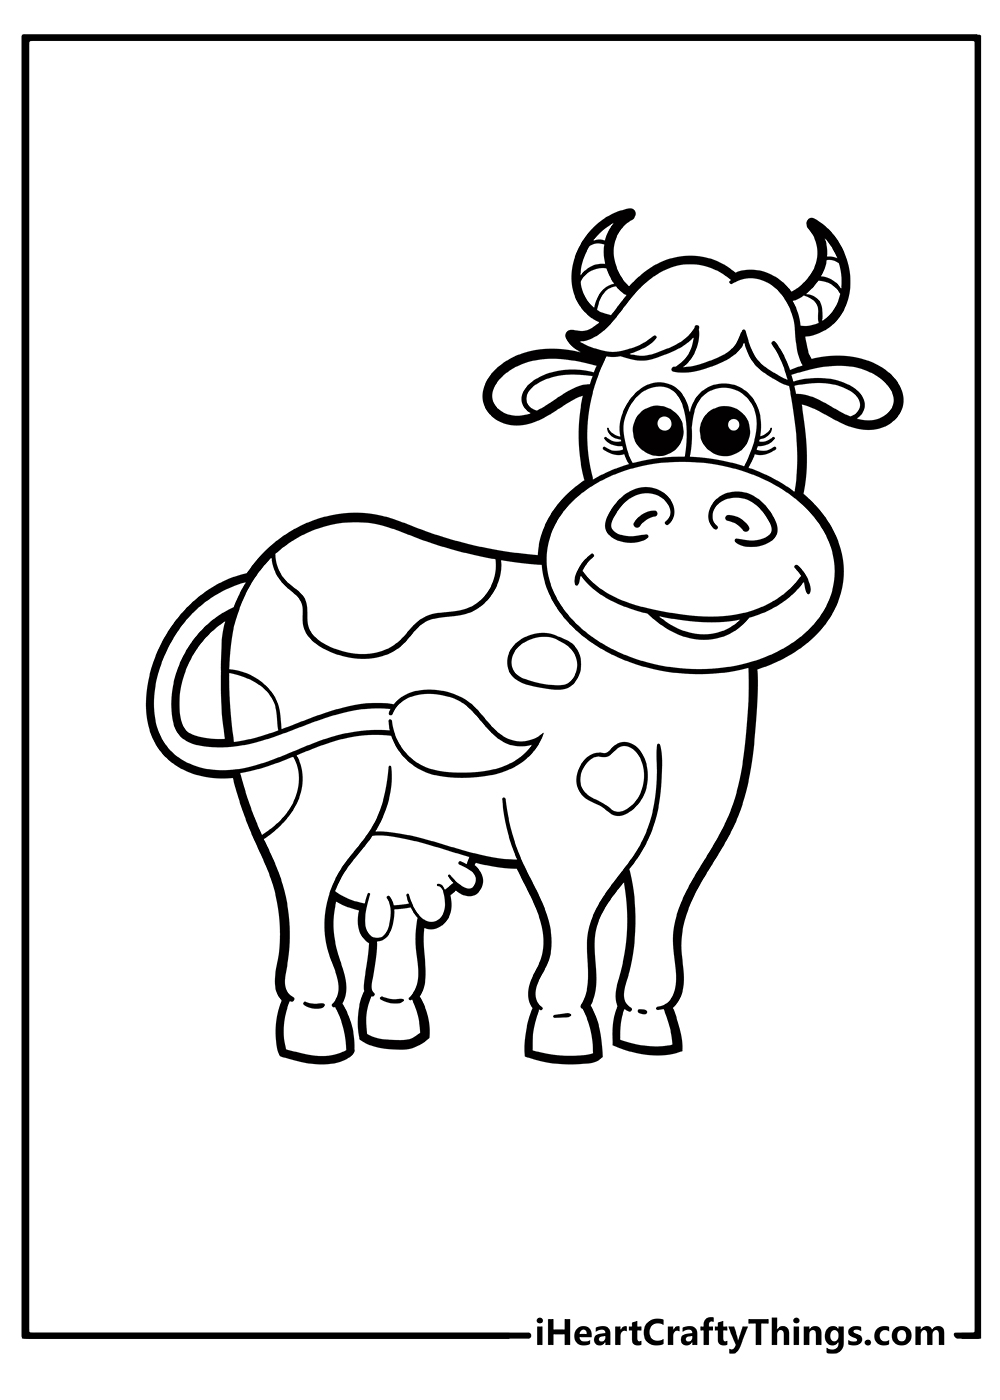 Cow Coloring Pages for kids free printable